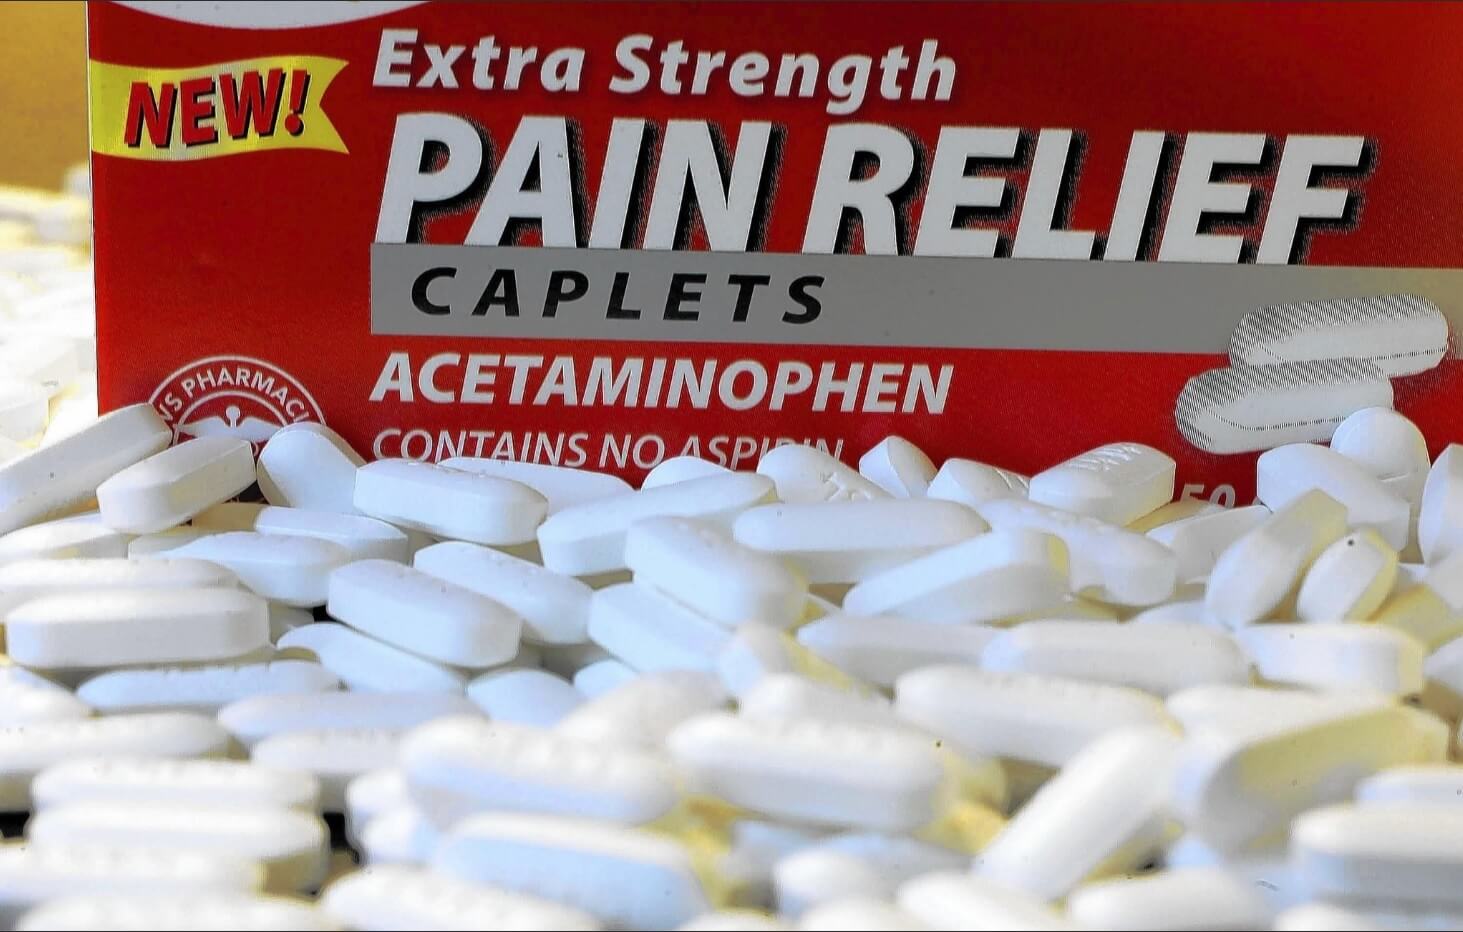 What is the toughest pain killer?